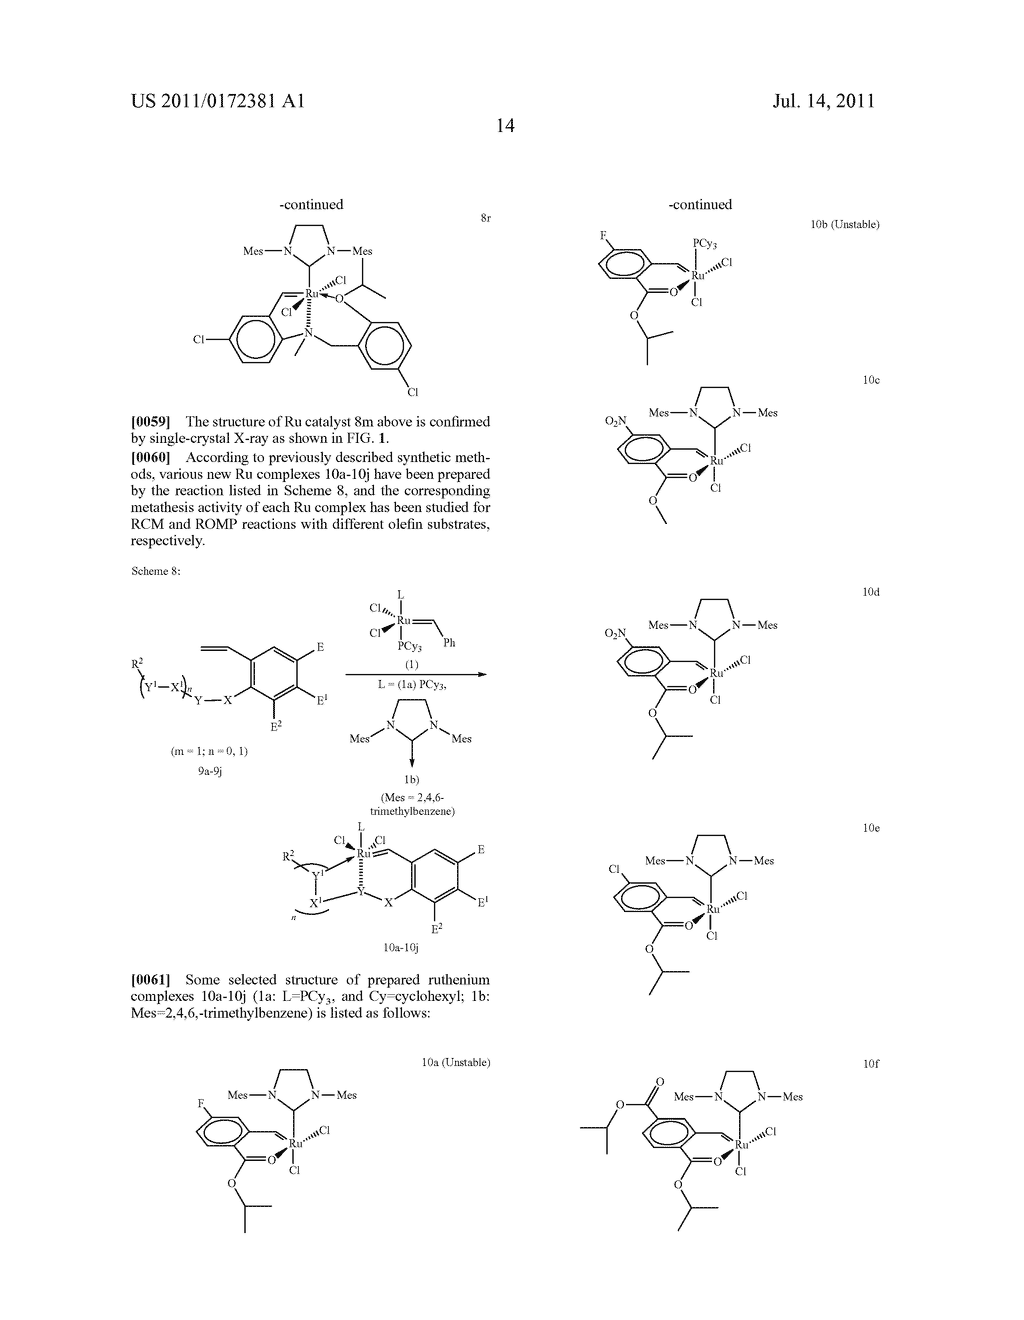 HIGHLY ACTIVE METATHESIS CATALYSTS SELECTIVE FOR ROMP AND RCM REACTIONS - diagram, schematic, and image 16